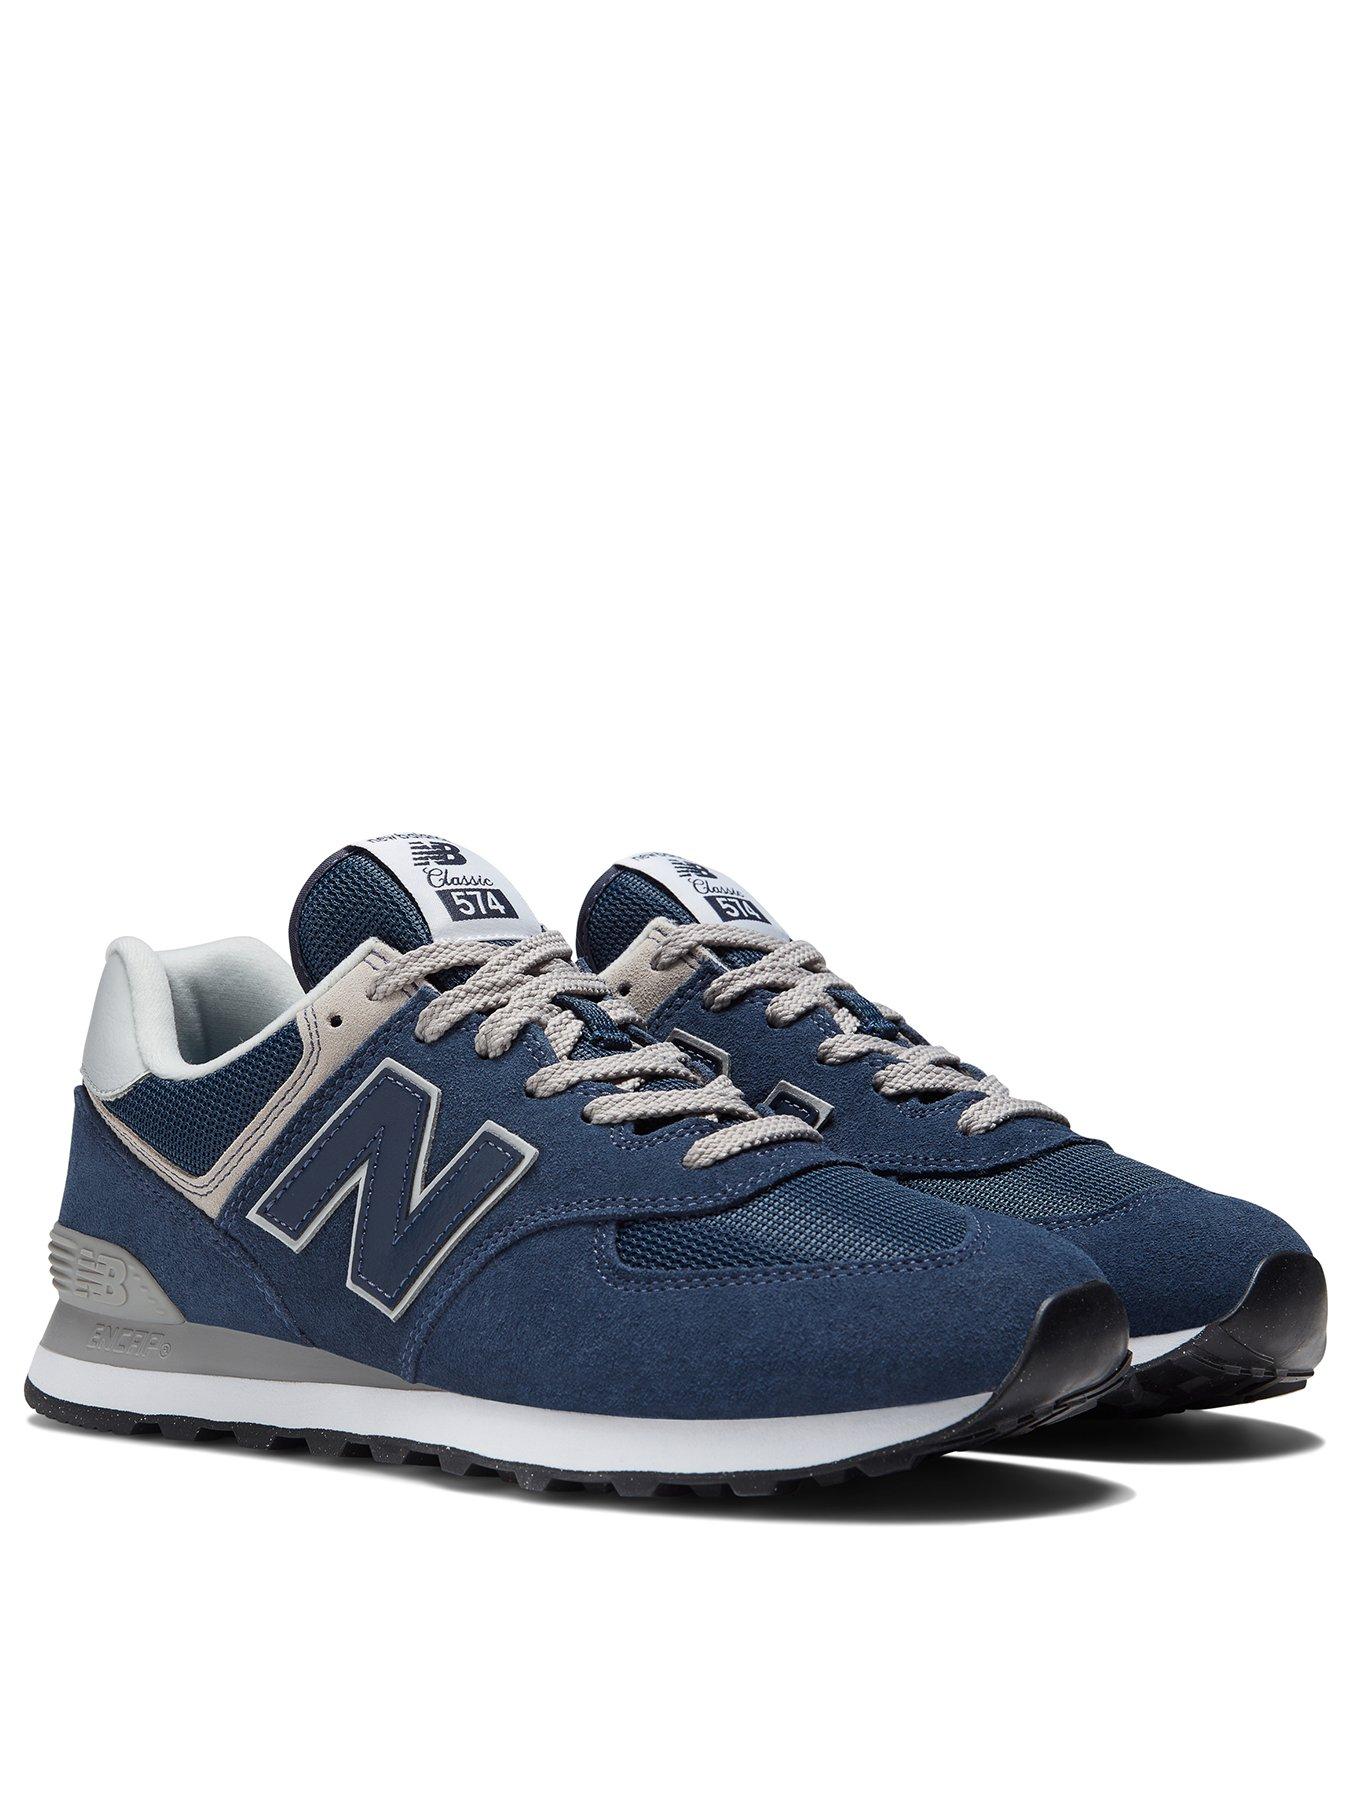 New Balance Mens 574 Trainers - Navy | very.co.uk